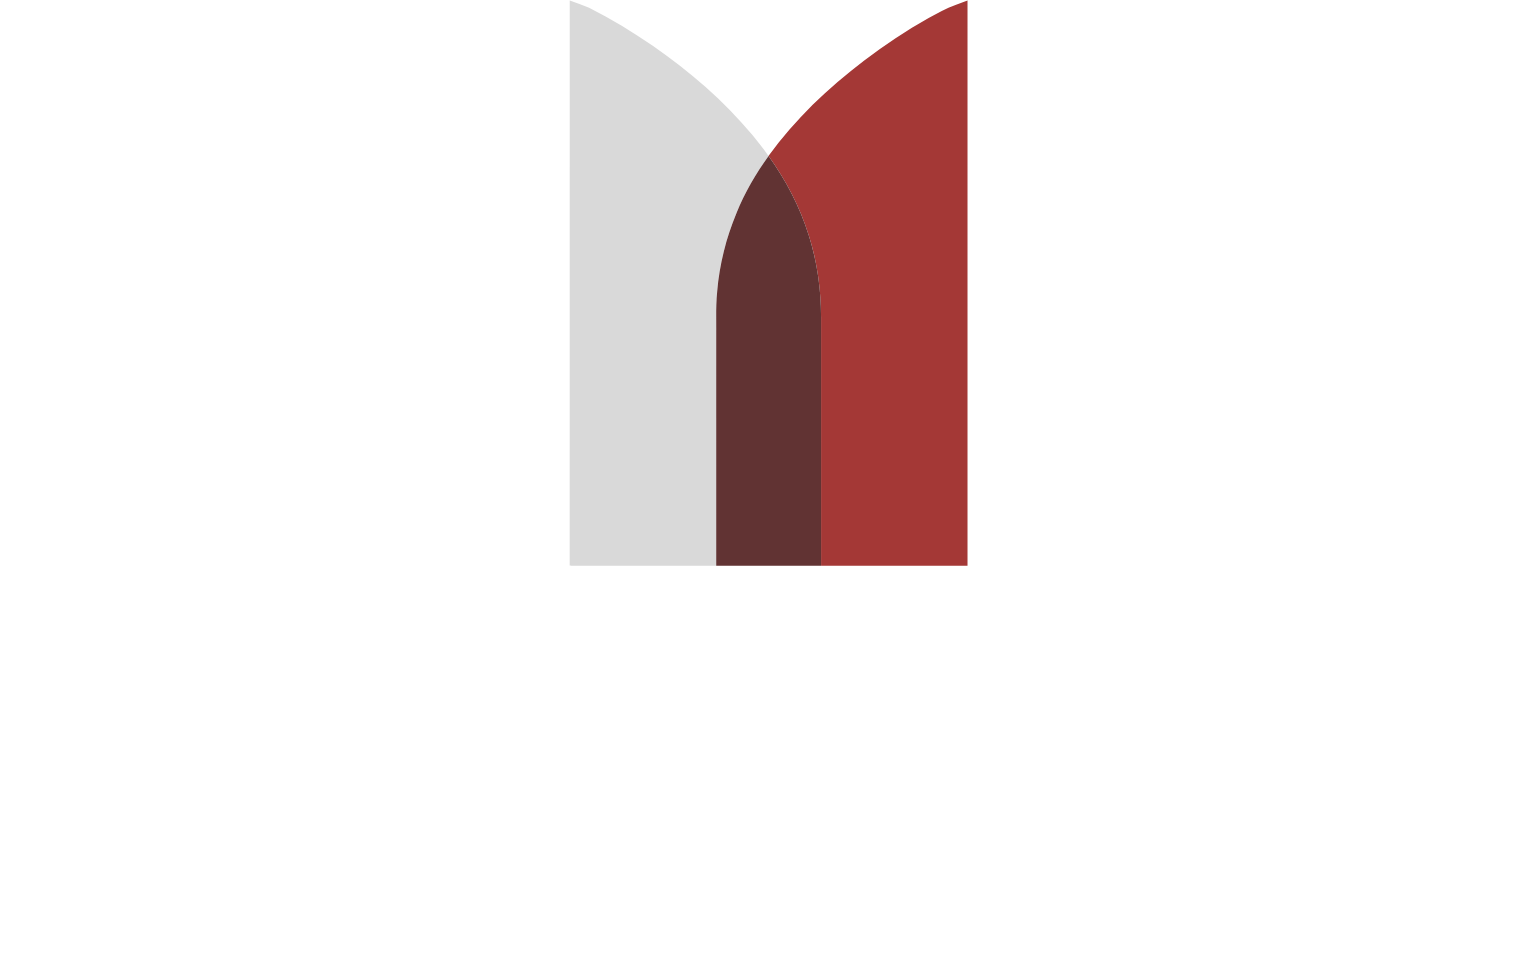 Office Properties Income Trust logo large for dark backgrounds (transparent PNG)